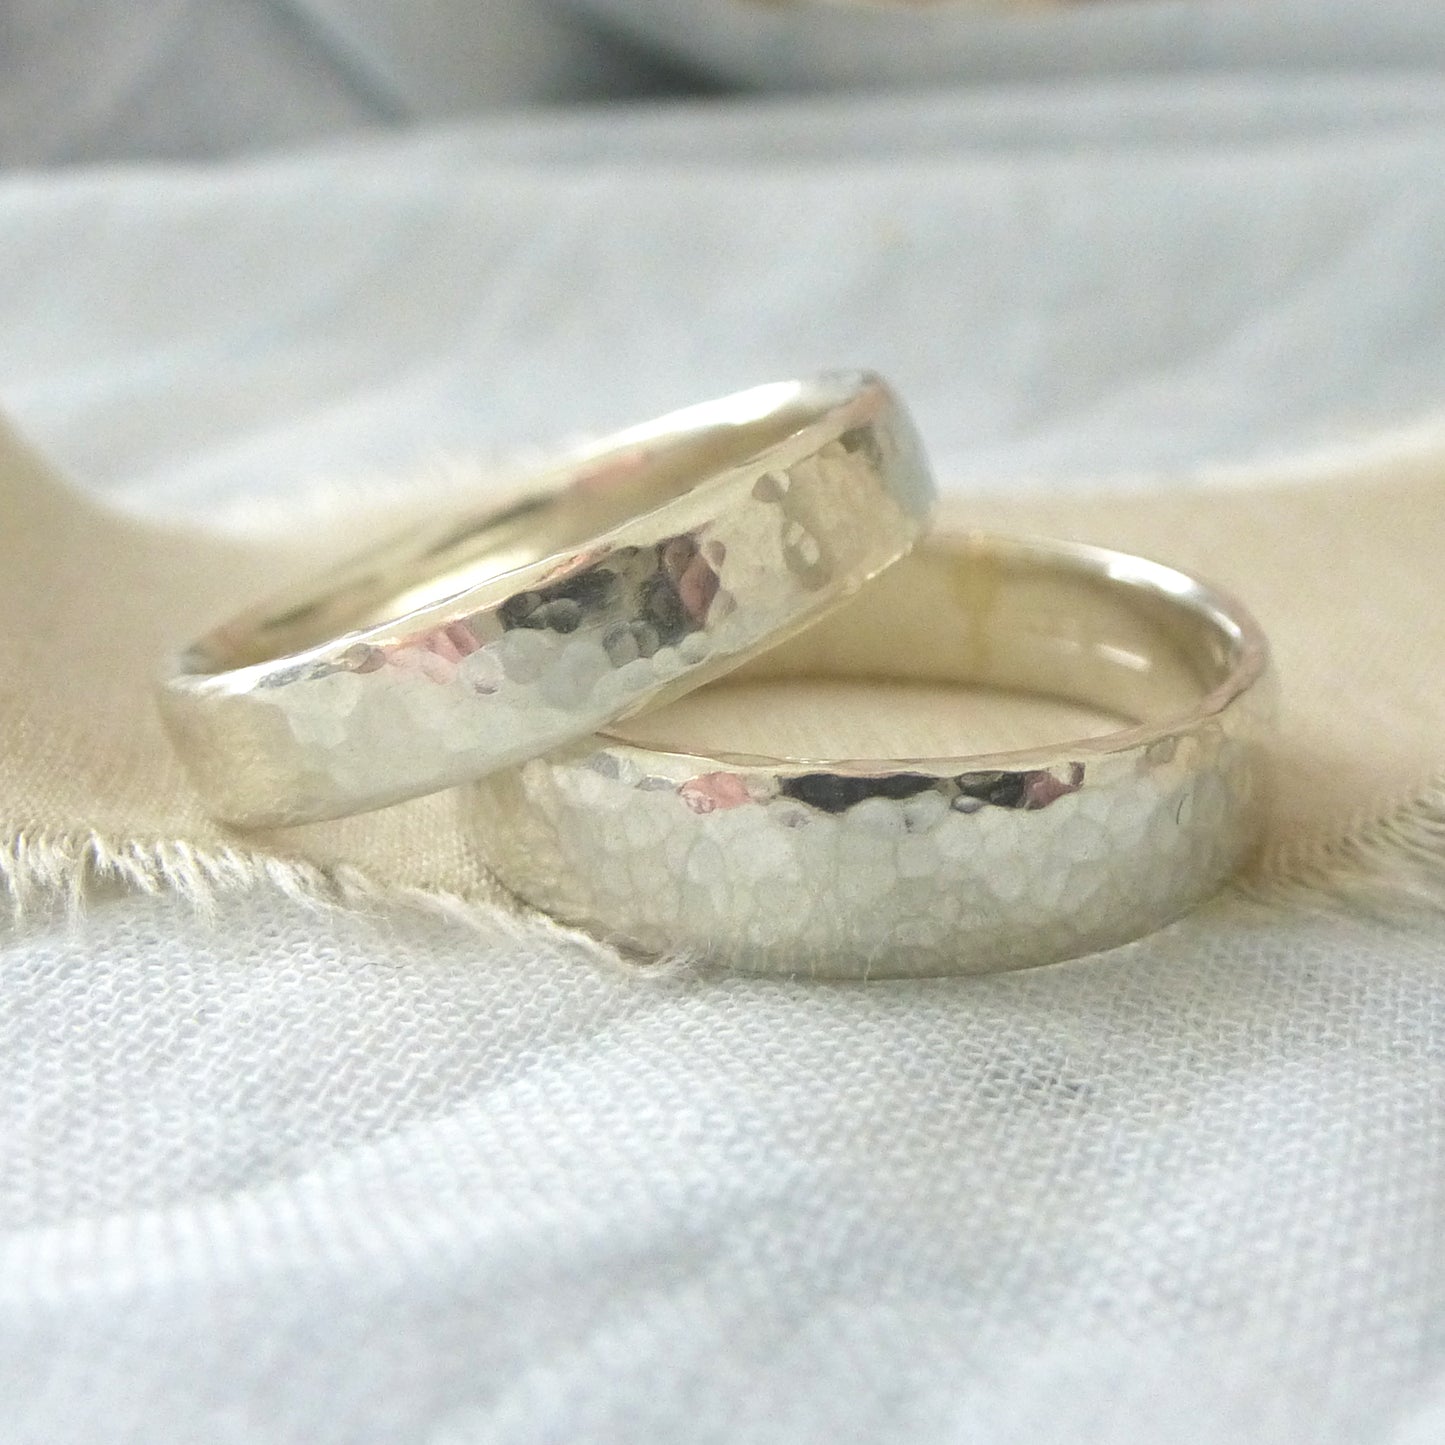 A pair of handmade wedding rings in 9ct white hammered gold, 100% recycled gold, Upper band 4mm, lower band 5mm